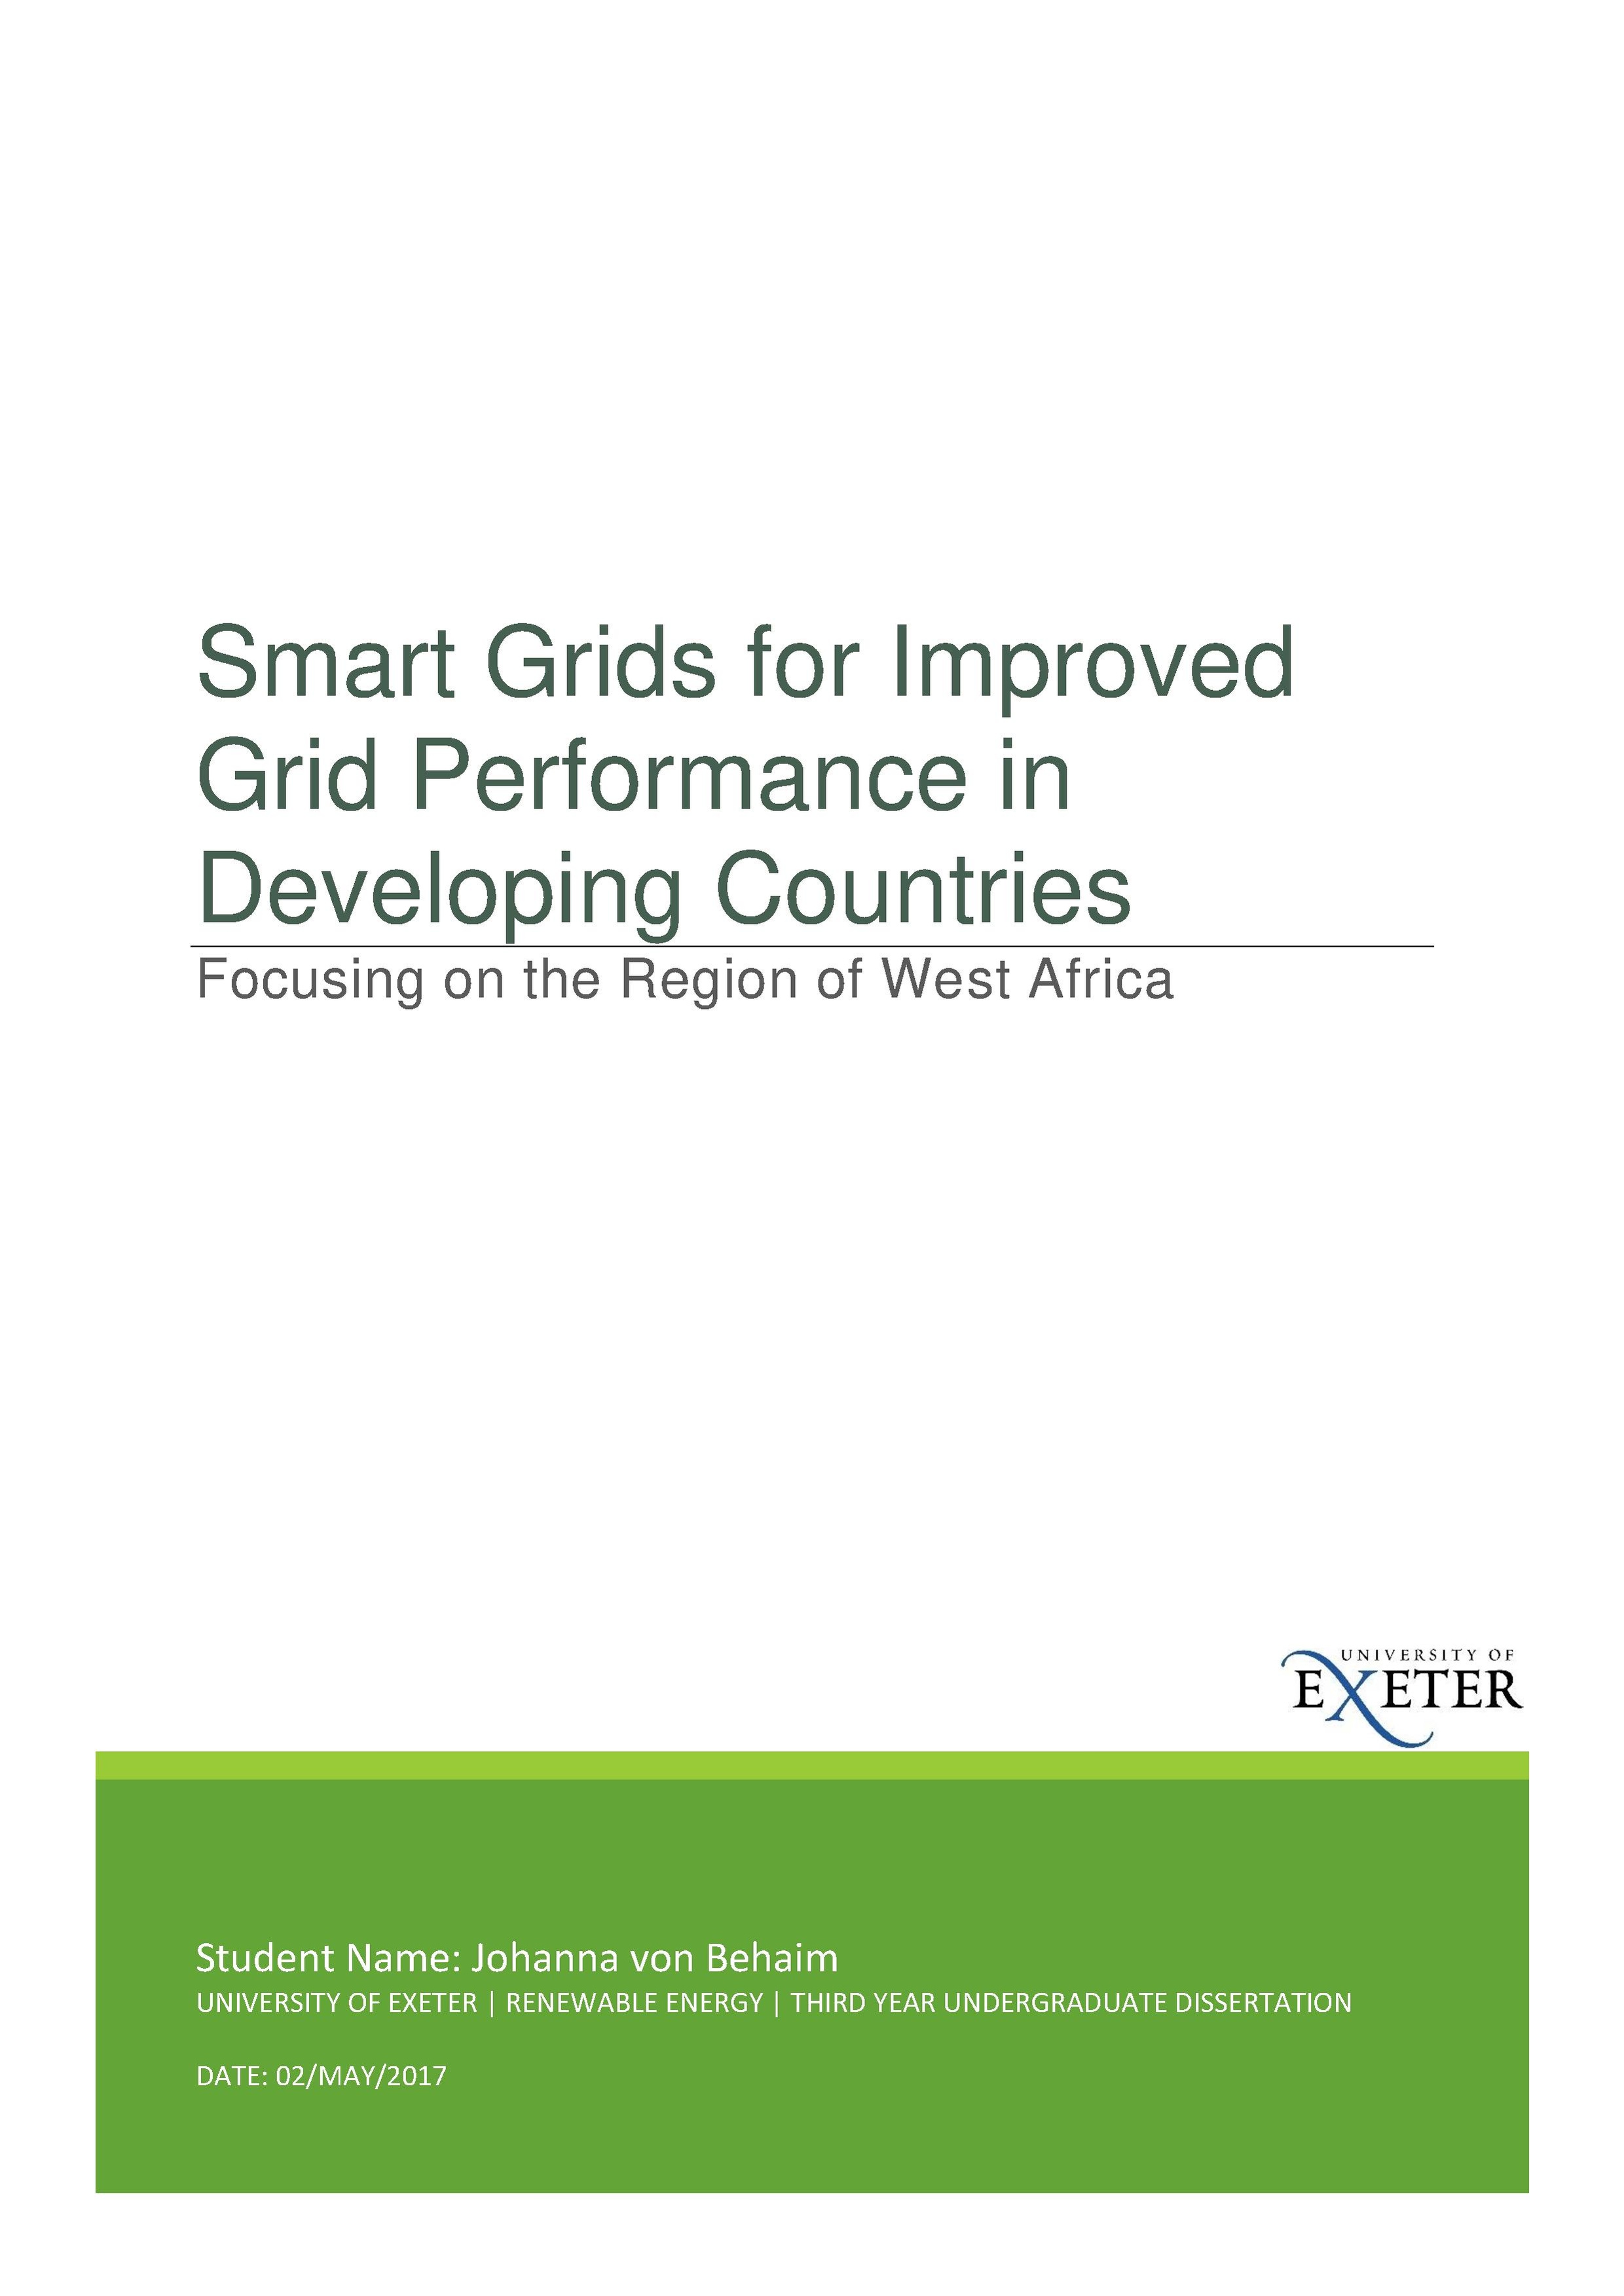 Smart Grids for Improved Grid Performance in Developing Countries - Focusing on the Region of West Africa